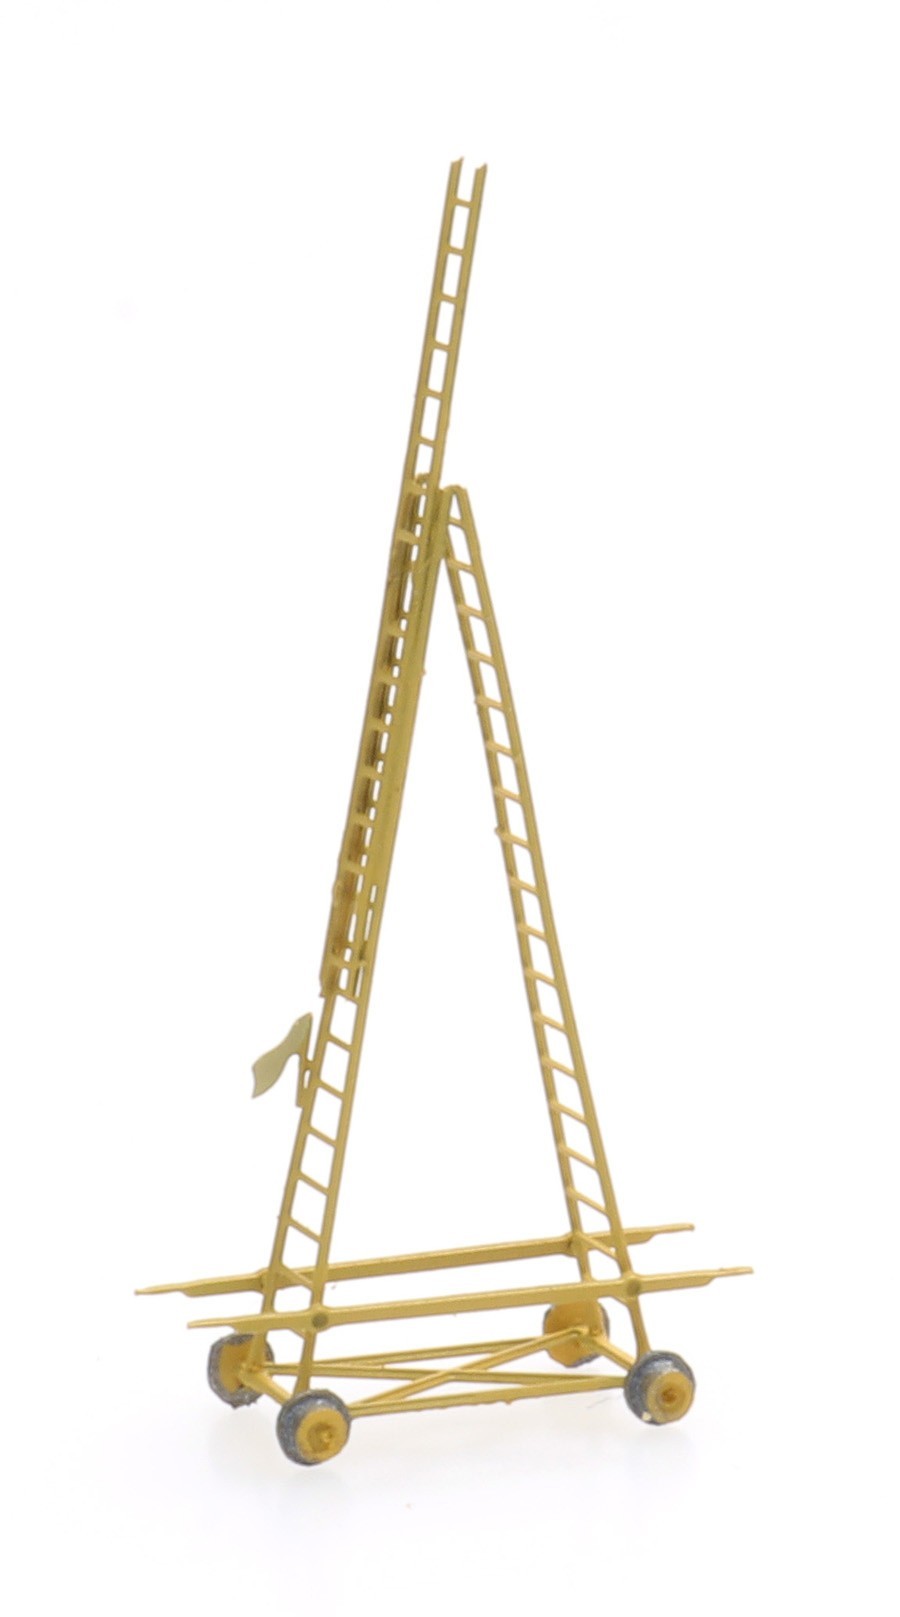 Z / 1:220 ready-made Lorry ladder catenary inspection , Article number: 322.035